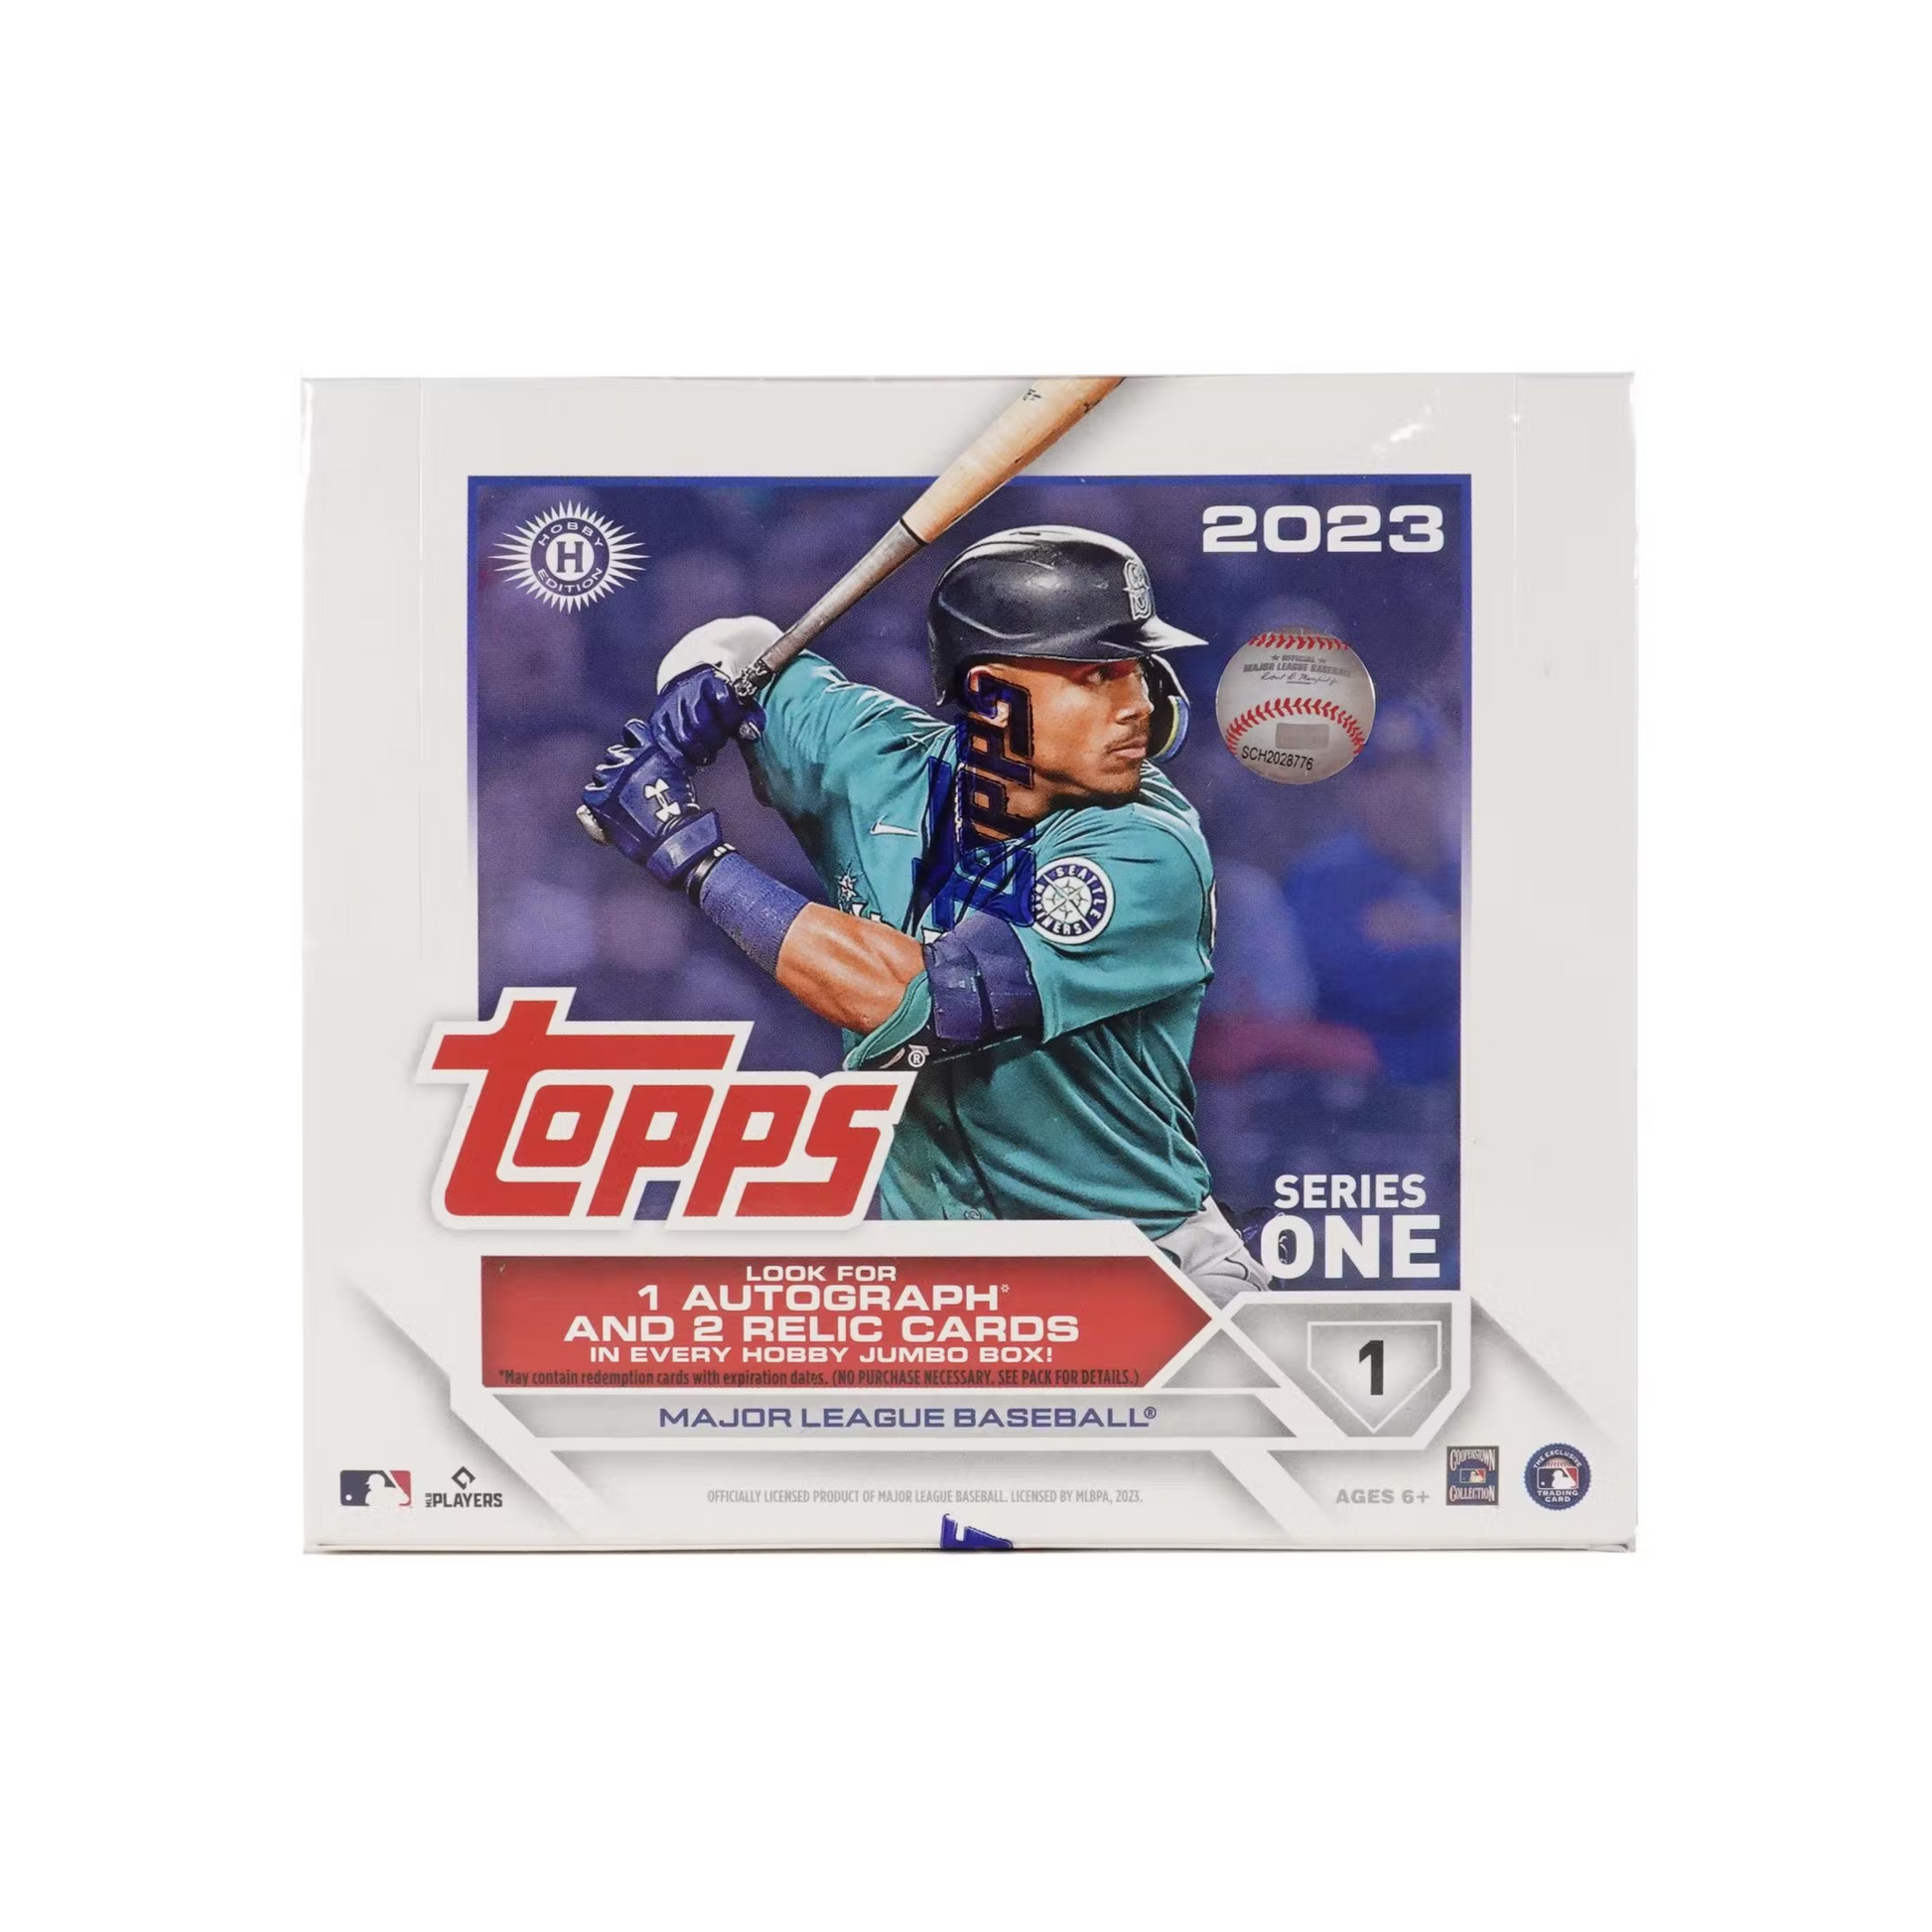 2023 Topps Series 1, City Connect Cap Patch Card, Complete Your